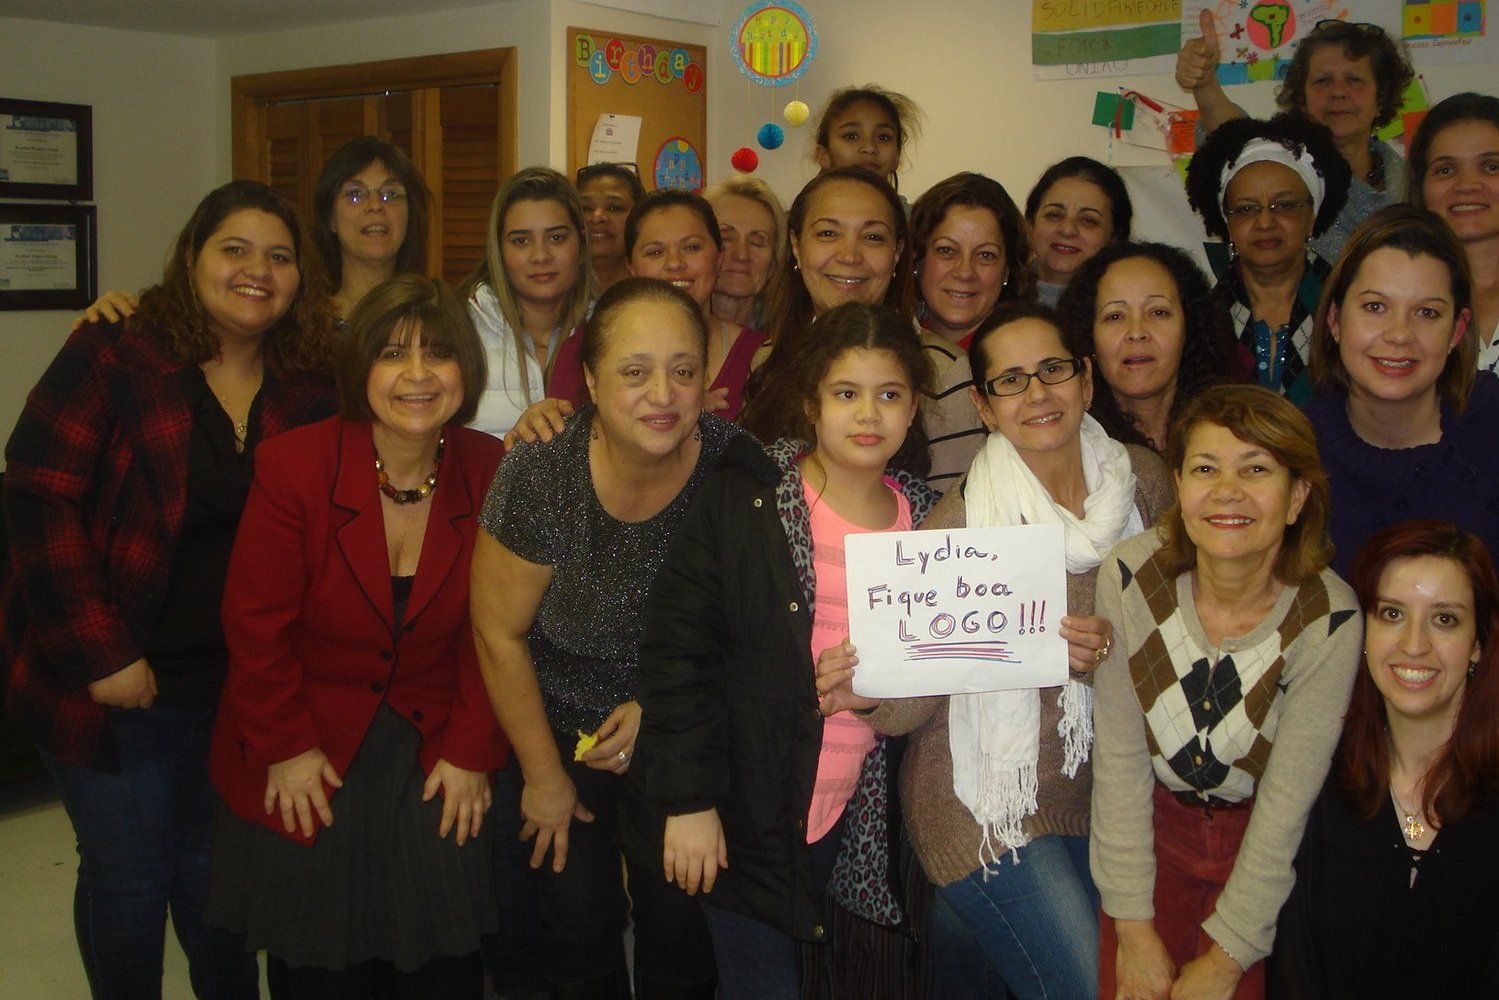  Crowd of over twenty women and girls smiling at the camera. One up front holds a sign reading “Lydia, Fique boa LOGO!!!” 